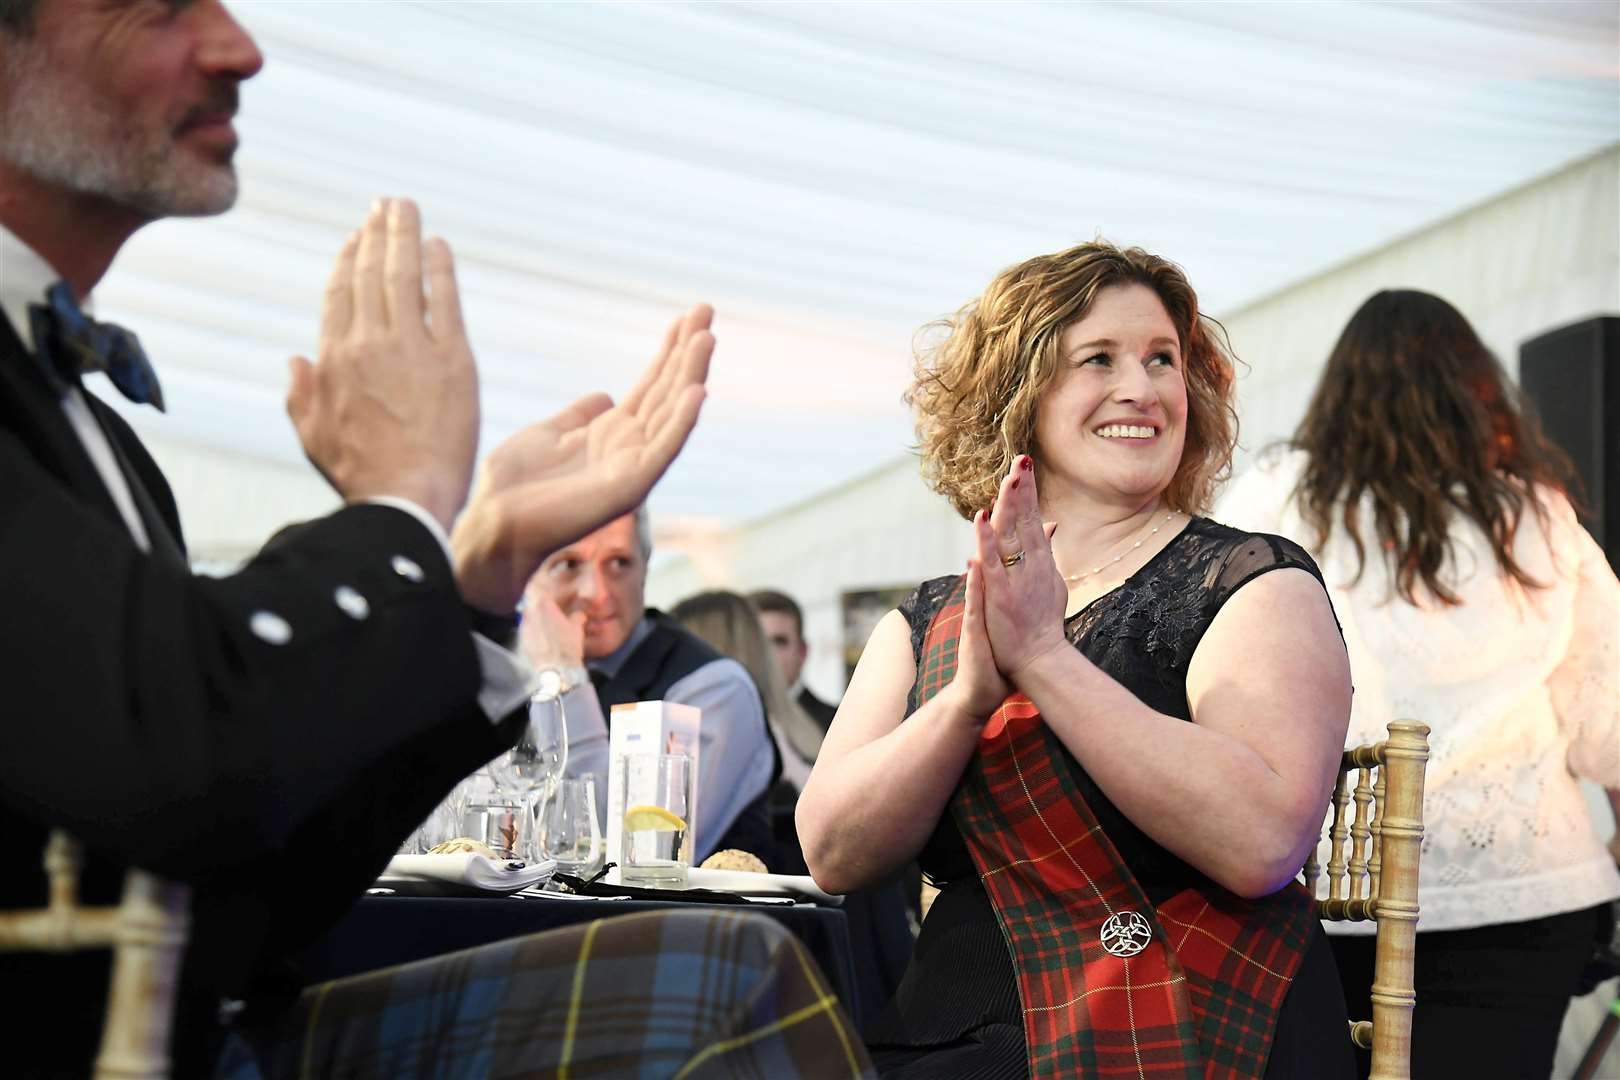 Kirsty Dagnan from Glenfiddich Distillery gets in the party mood.Picture: Becky Saunderson